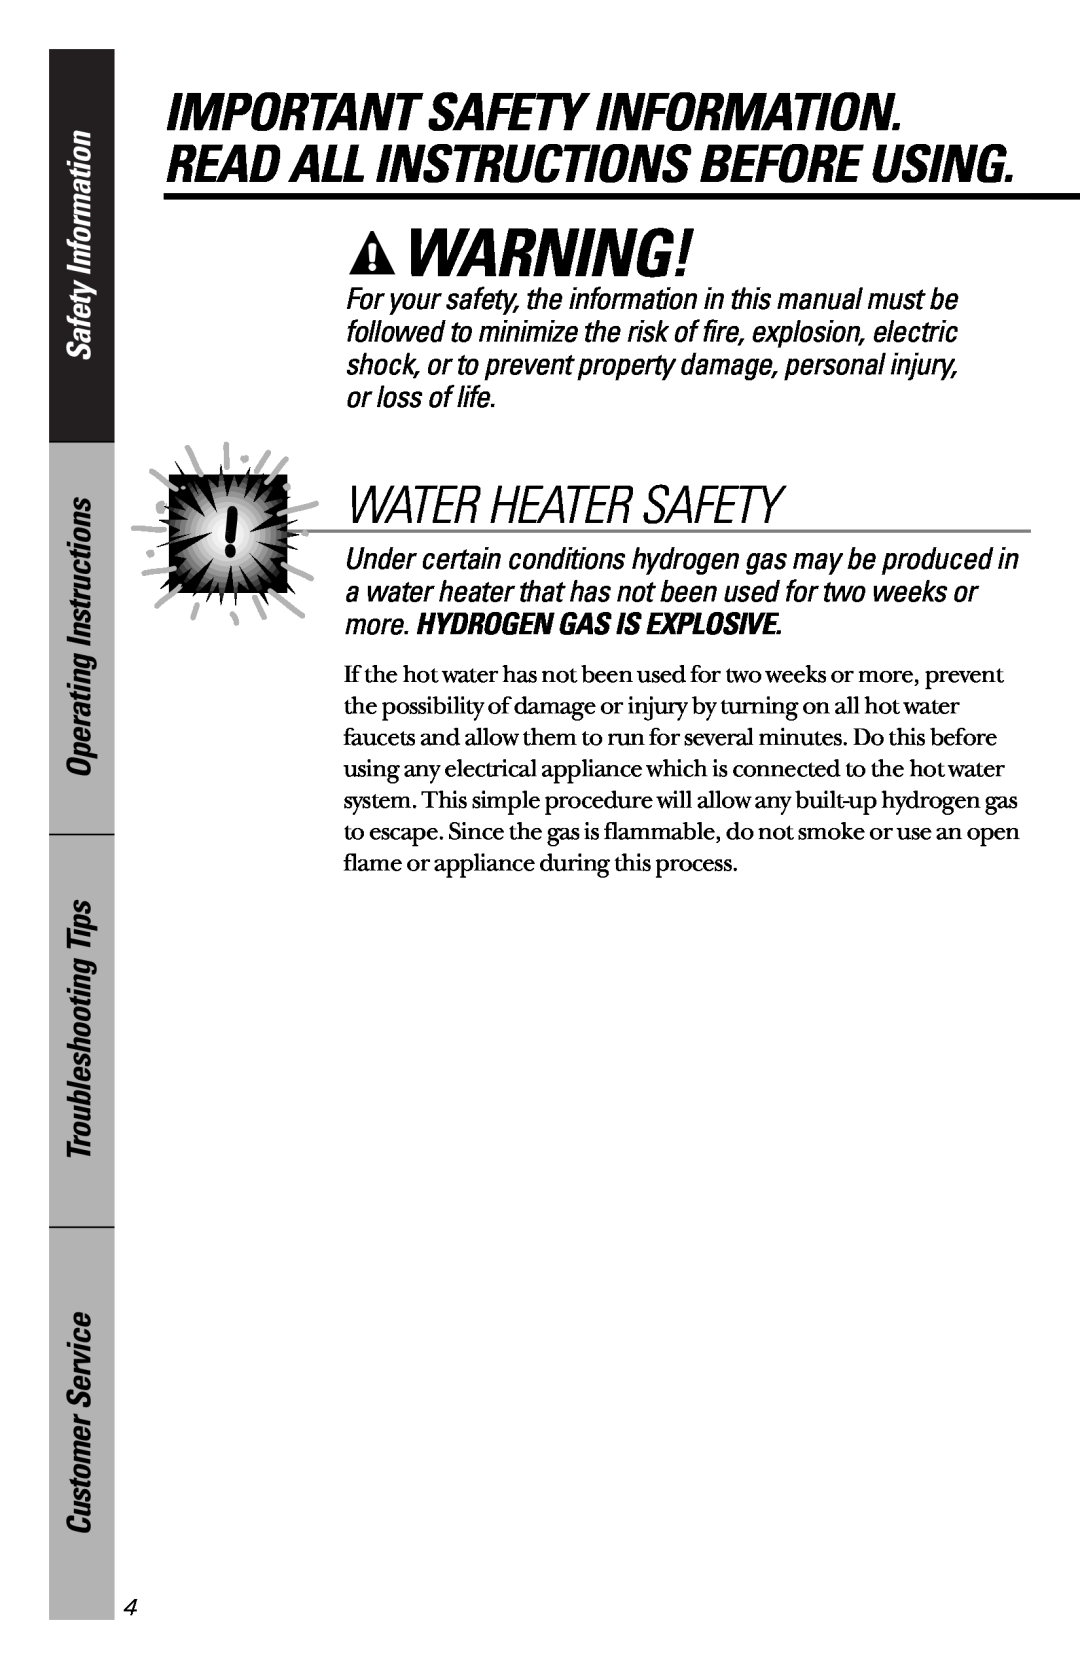 GE GSD2600, GSD2300 Water Heater Safety, Safety Information, Operating Instructions Troubleshooting Tips, Customer Service 